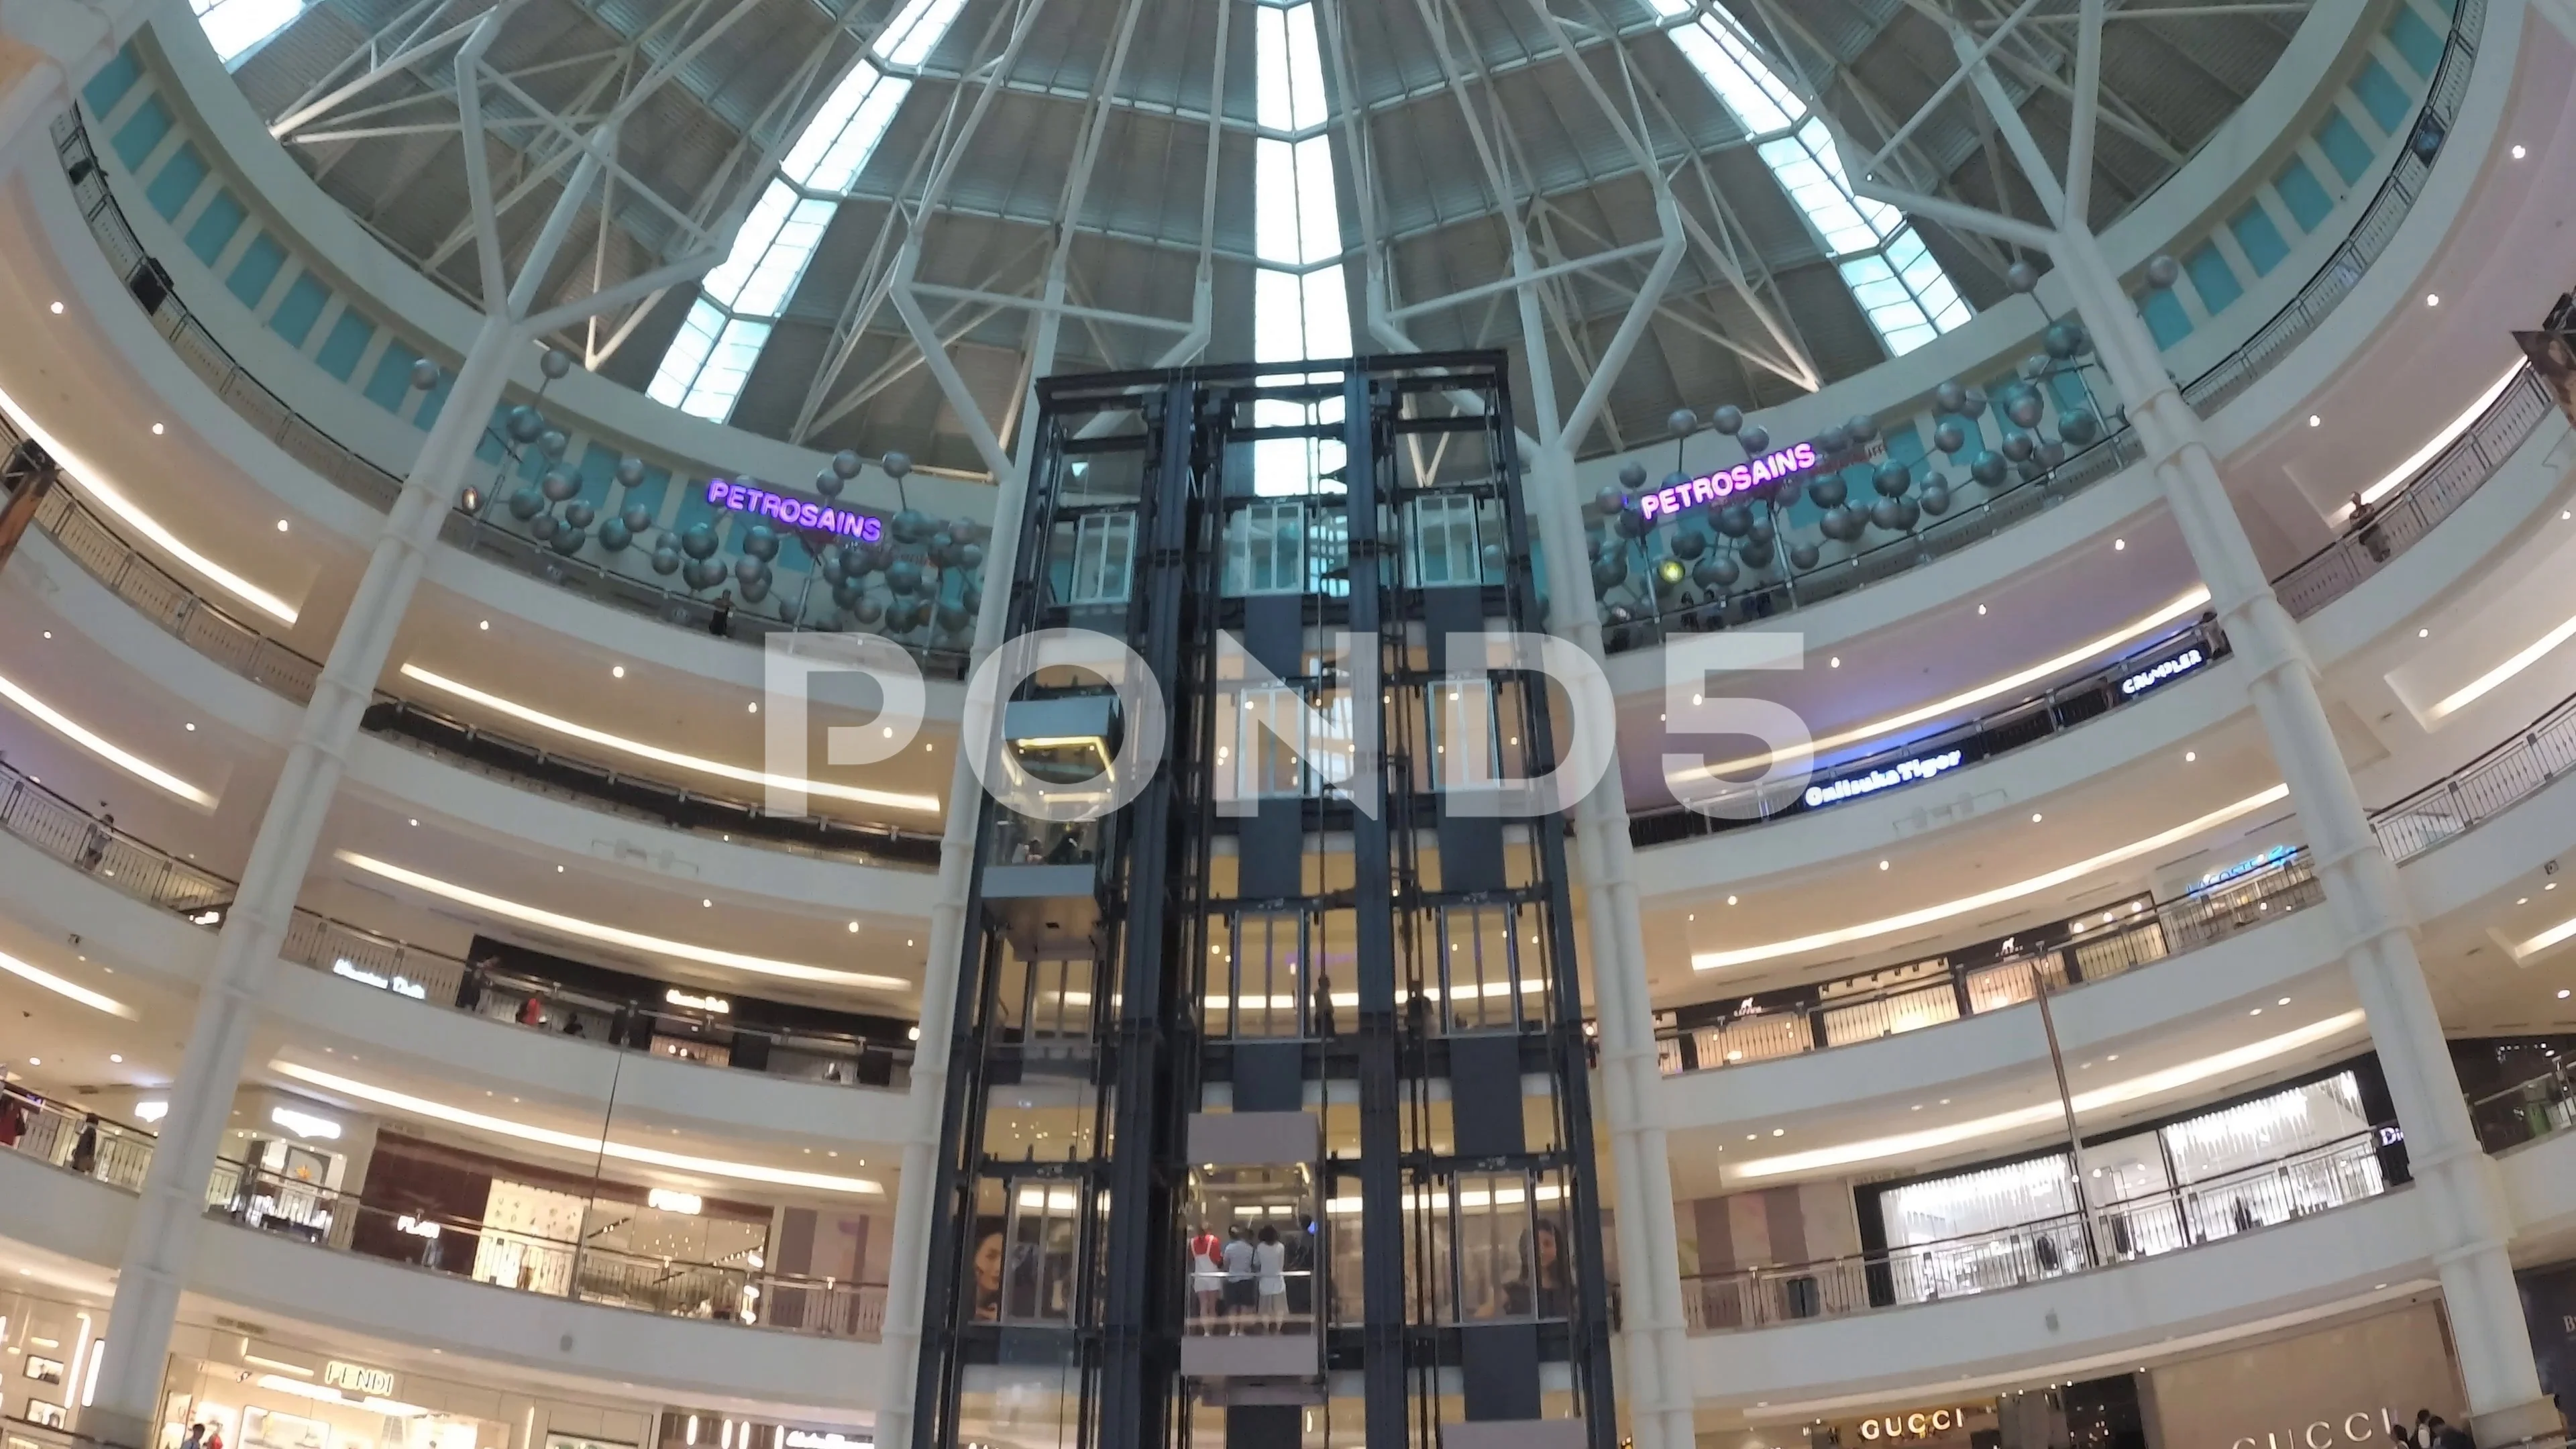 Iconsiam,Thailand -Oct 30,2019: People can seen having their meal at  Iconsiam shopping mall,it is offers high-end brands and an indoor floating  market Stock Photo - Alamy